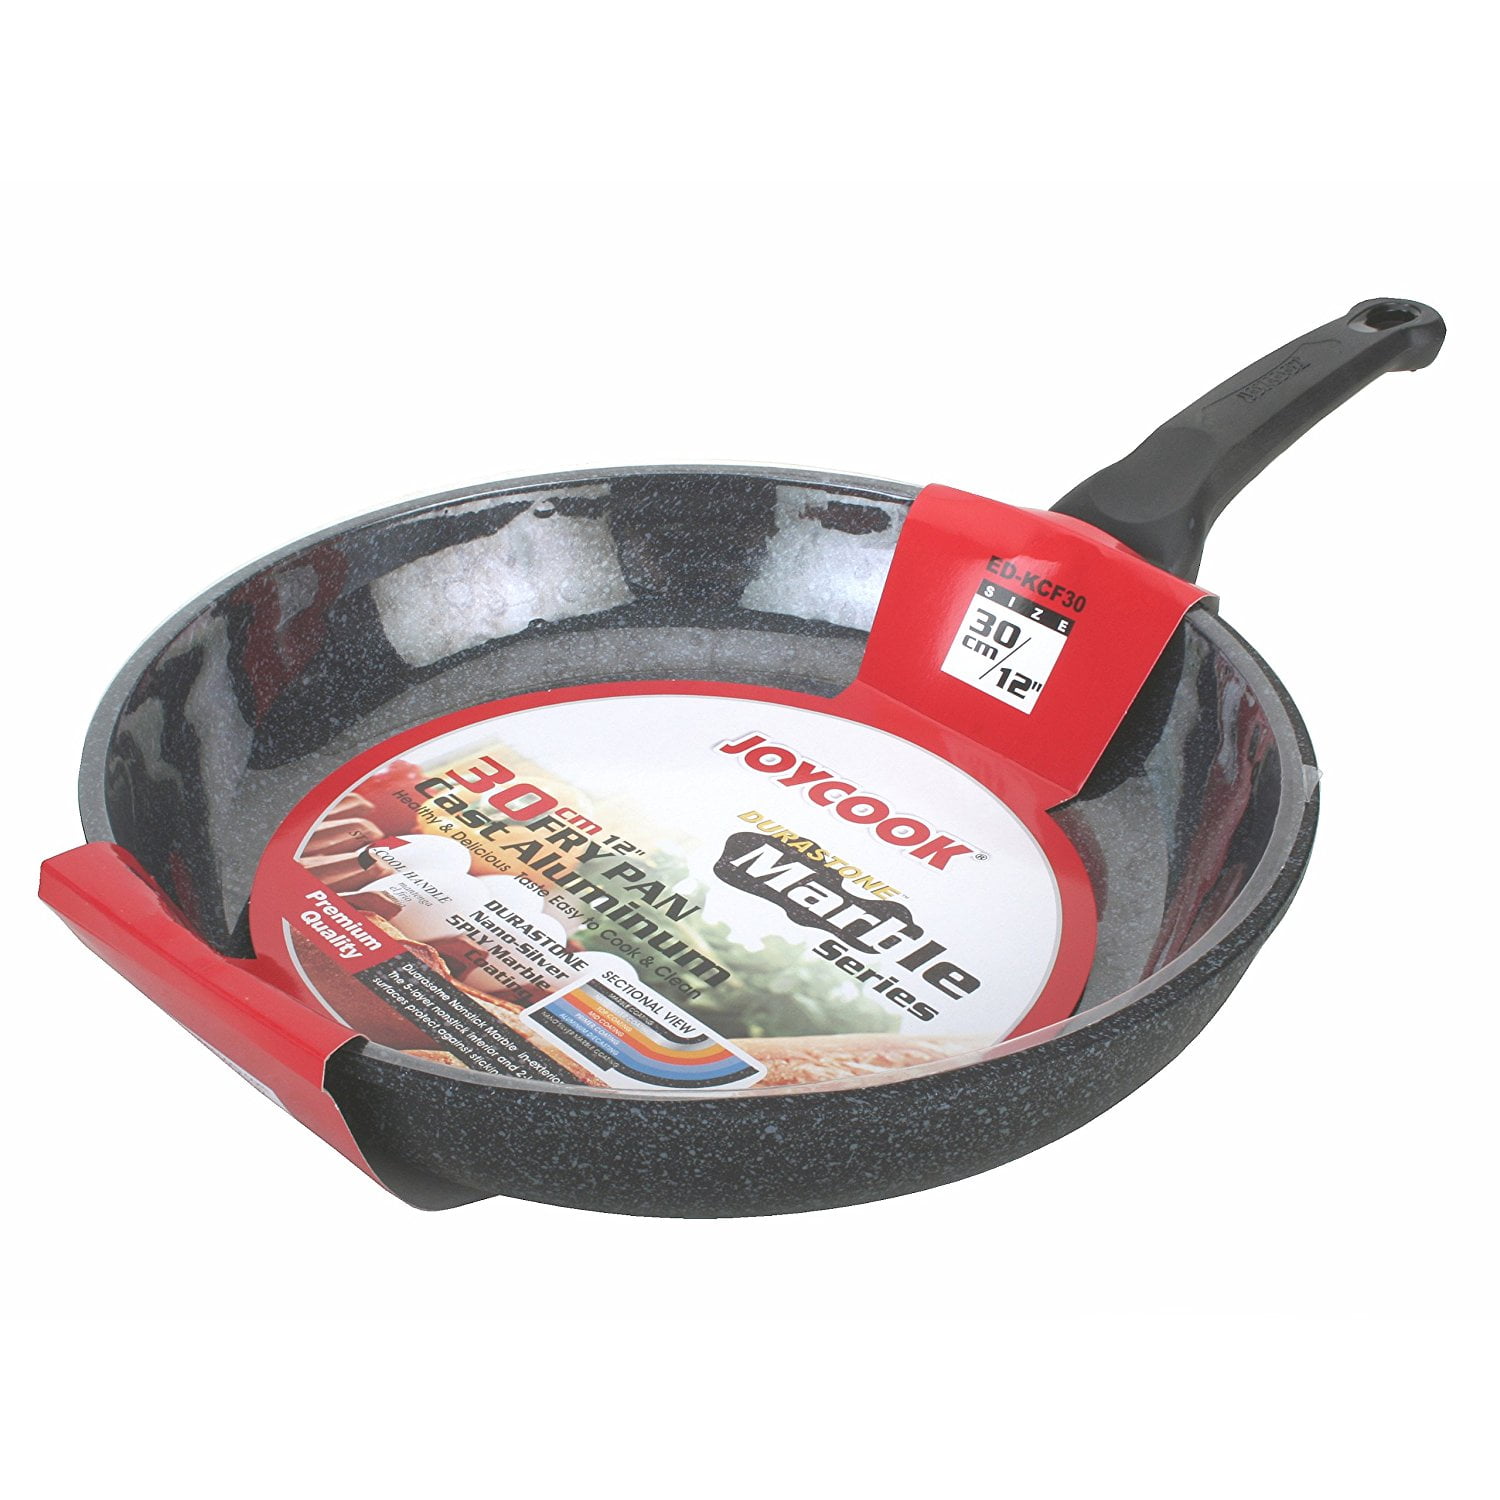 28cm / 11 Inch Dream Chef Marble Coated Cast Aluminum Non Stick Frying Pan 